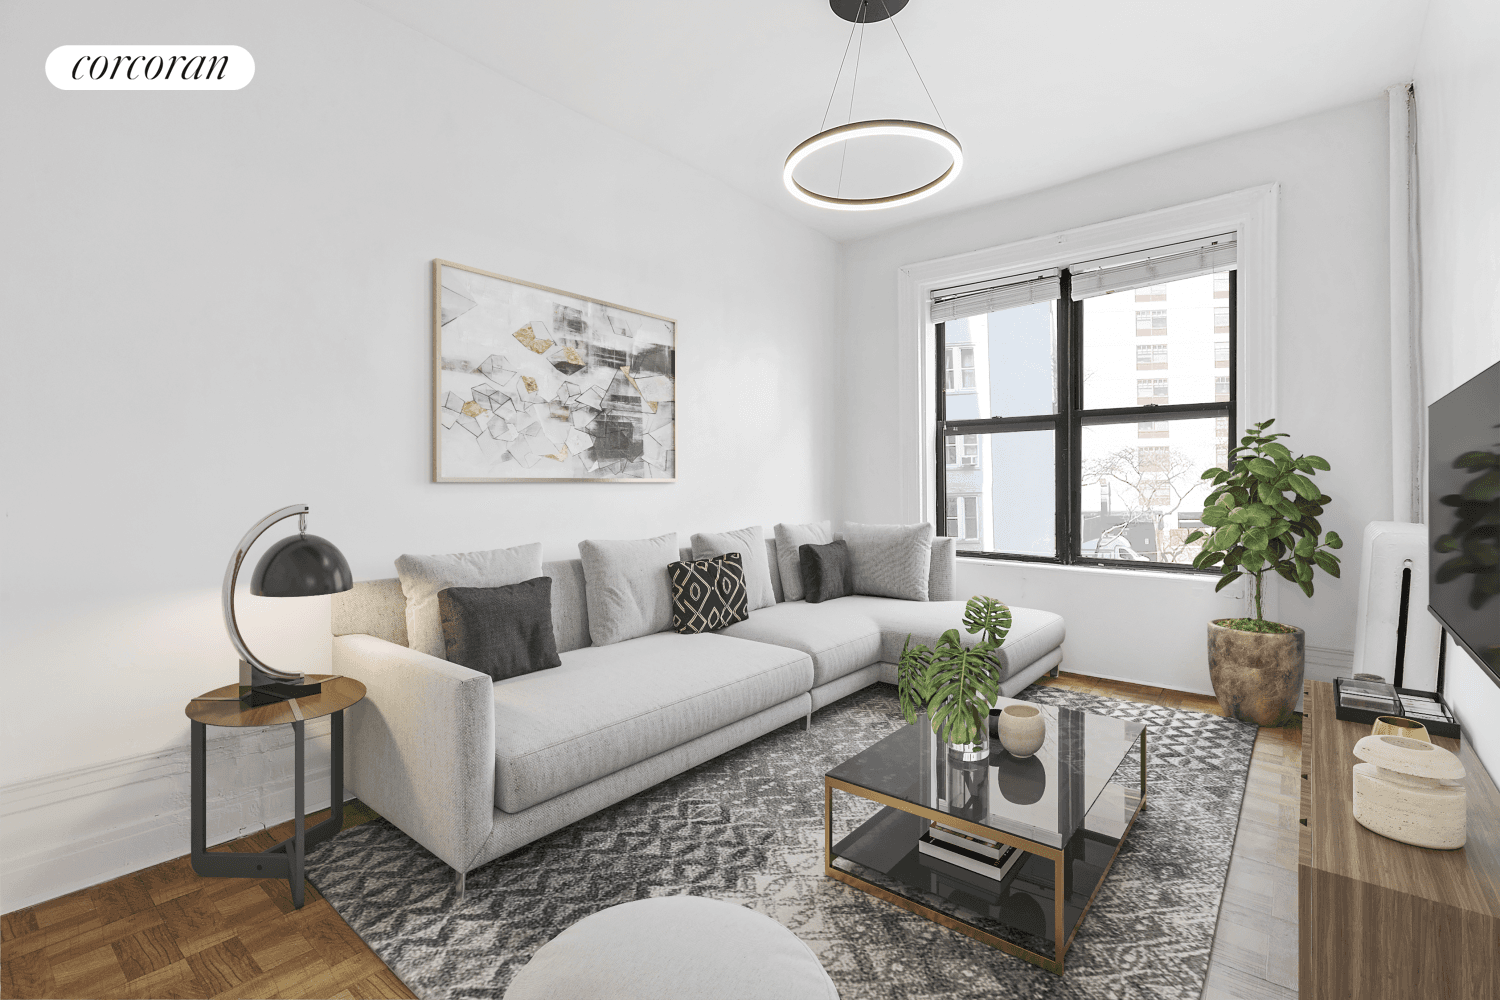 Welcome to 503 West 111th Street 33, a charming apartment offering a blend of modern convenience and flexible living arrangements in a prime location near Central Park.